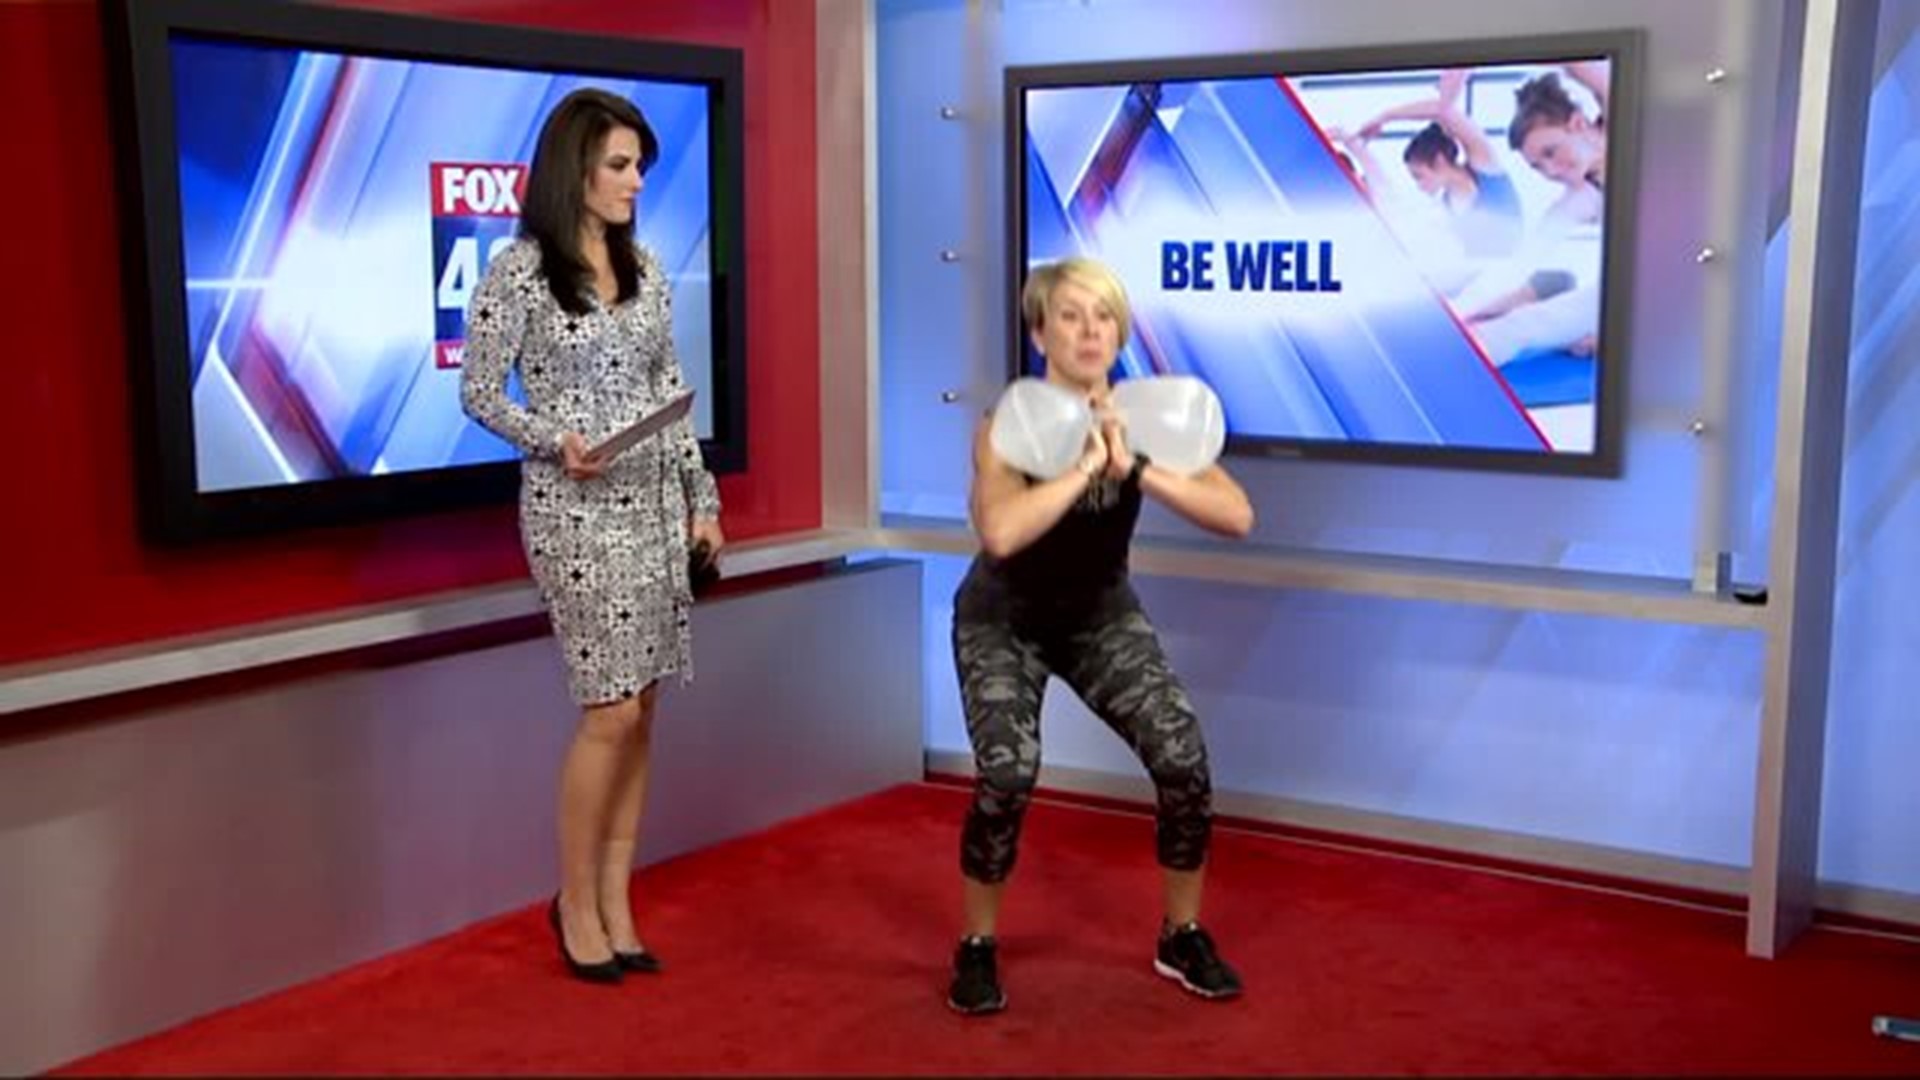 Be Well: Workouts can be done with unconventional tools